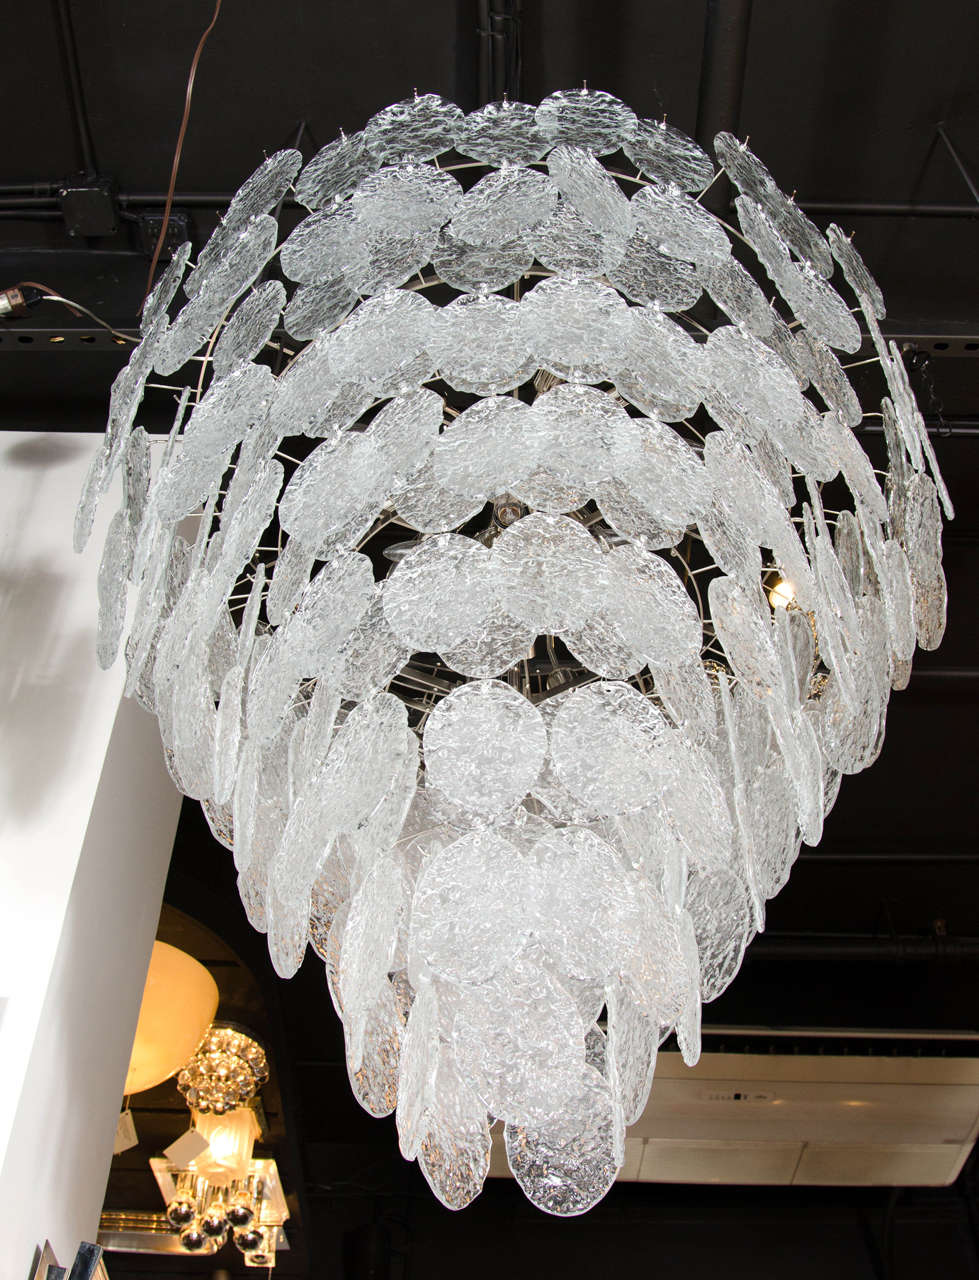 This sophisticated chandelier was handblown in Murano, Italy- the island off the coast of Venice renowned for centuries for its superlative glass production. It consists of multi handblown Murano glass disks in eight tiers in frosted and clear